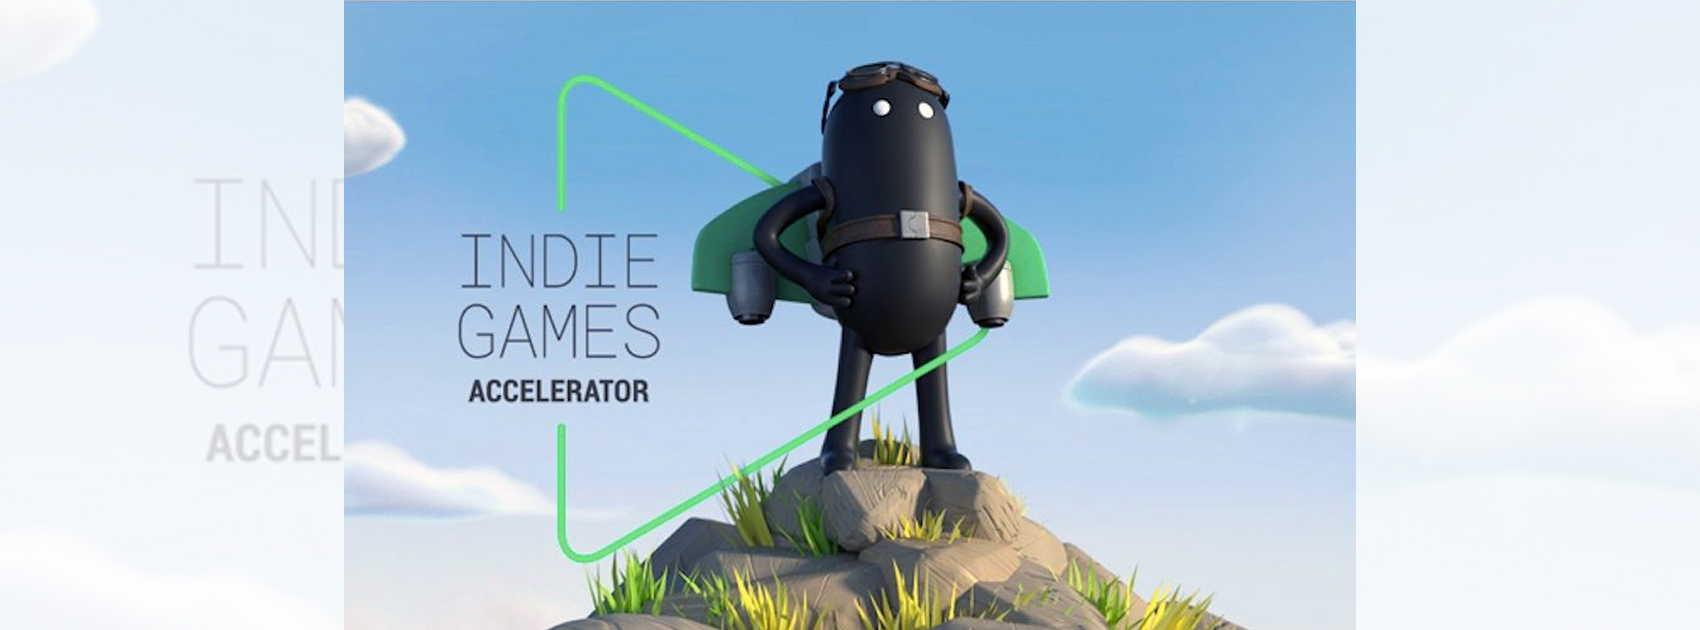 Google Launches Indie Game Accelerator,Gaming Startups In Asia,Game Developers in Asia,Startup Stories,Startup News India,Latest Business News 2018,Technology News 2018,Indie Games Accelerator in Asia,Google Gaming Startups,Gaming Startups